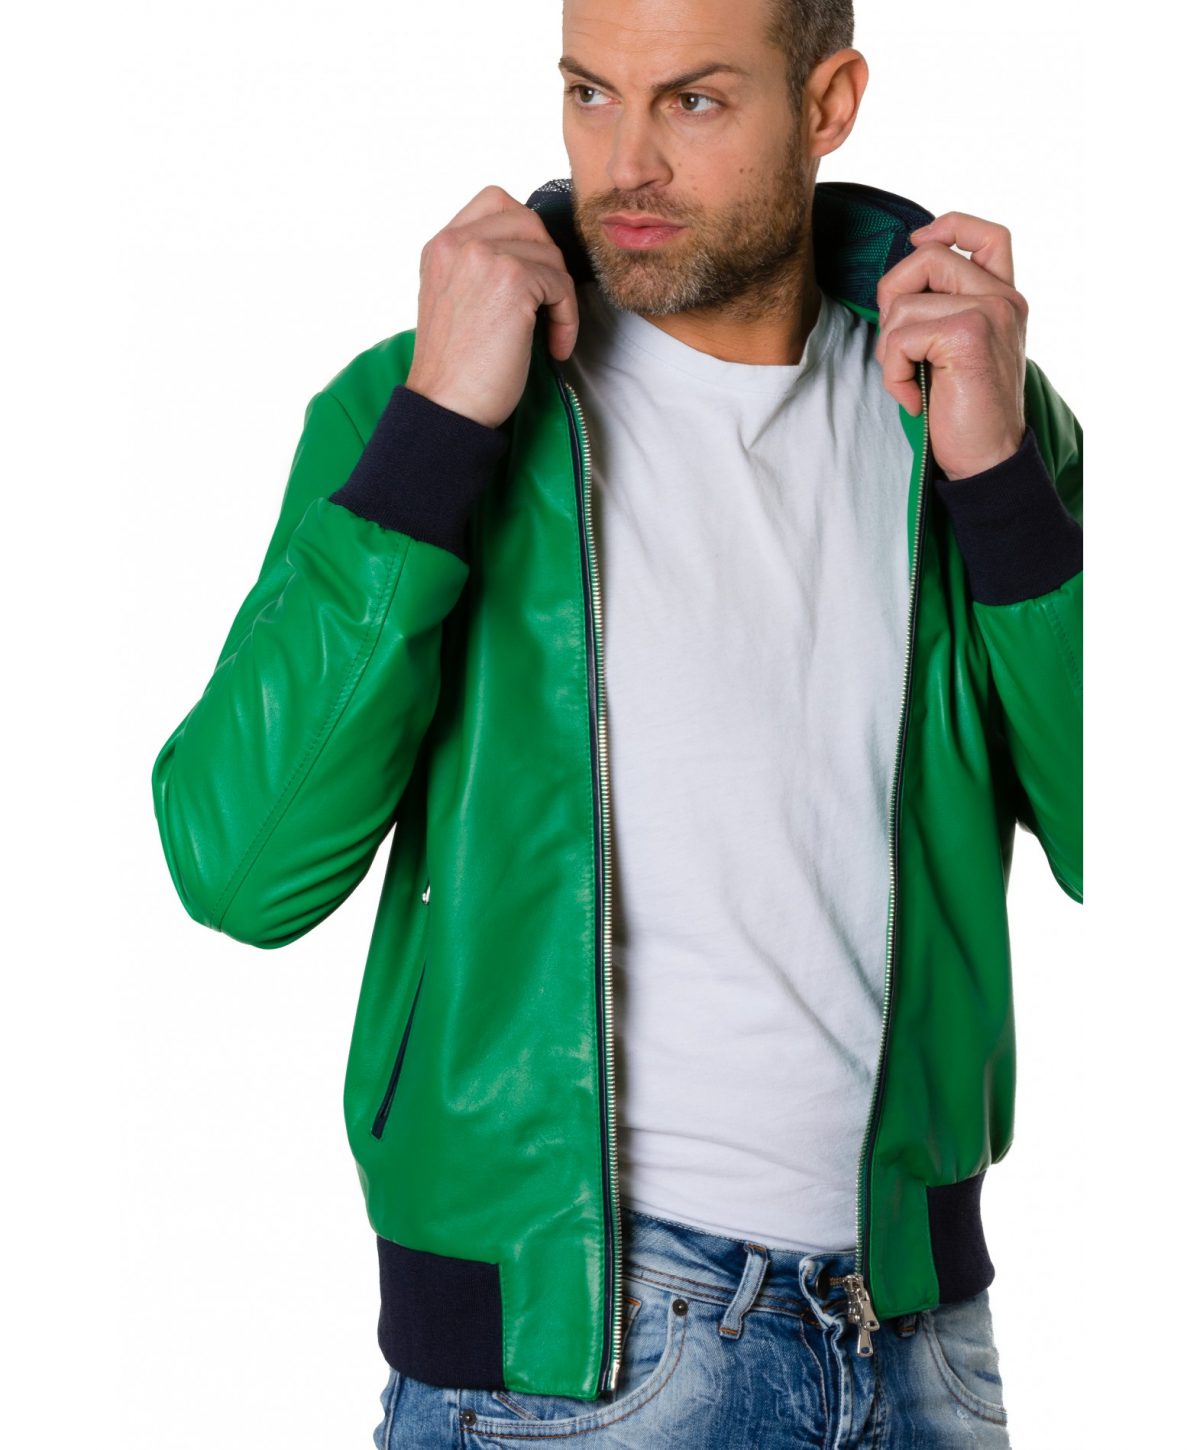 Green/Blue Colour – Lamb Leather Hooded Jacket Smooth Aspect